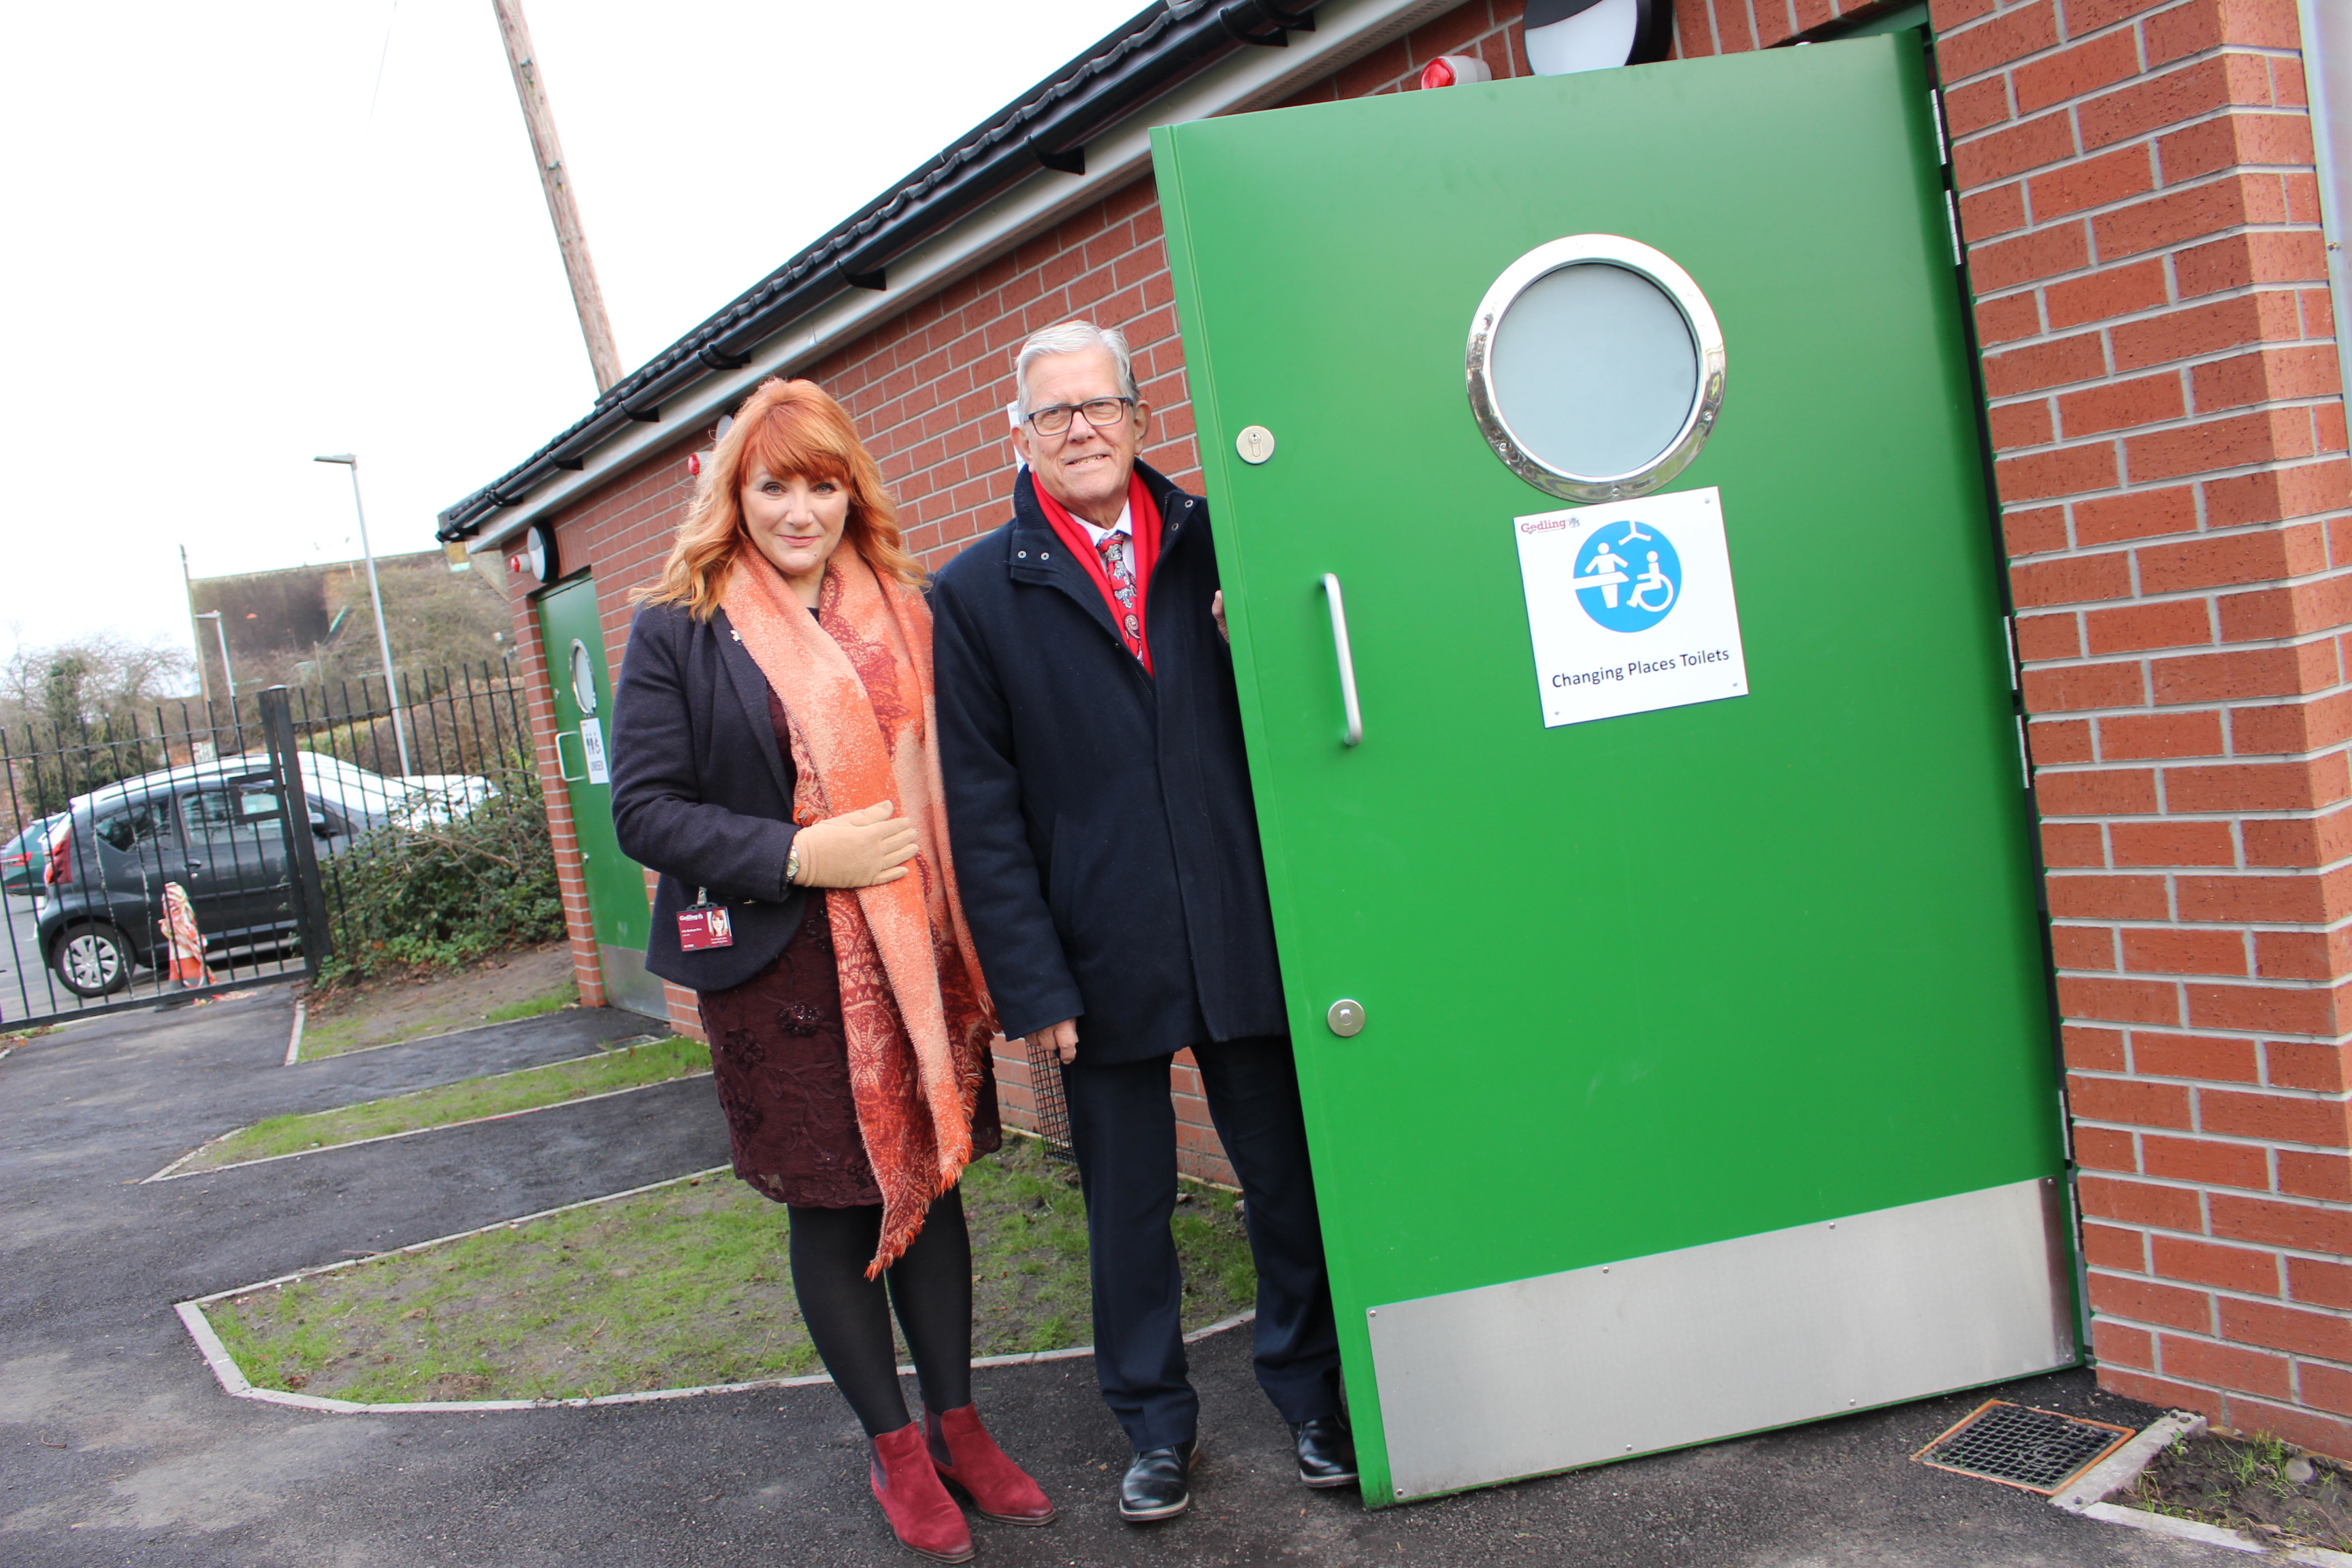 Councillor John Clarke and Councillor Kathryn Fox on location at the new facilites